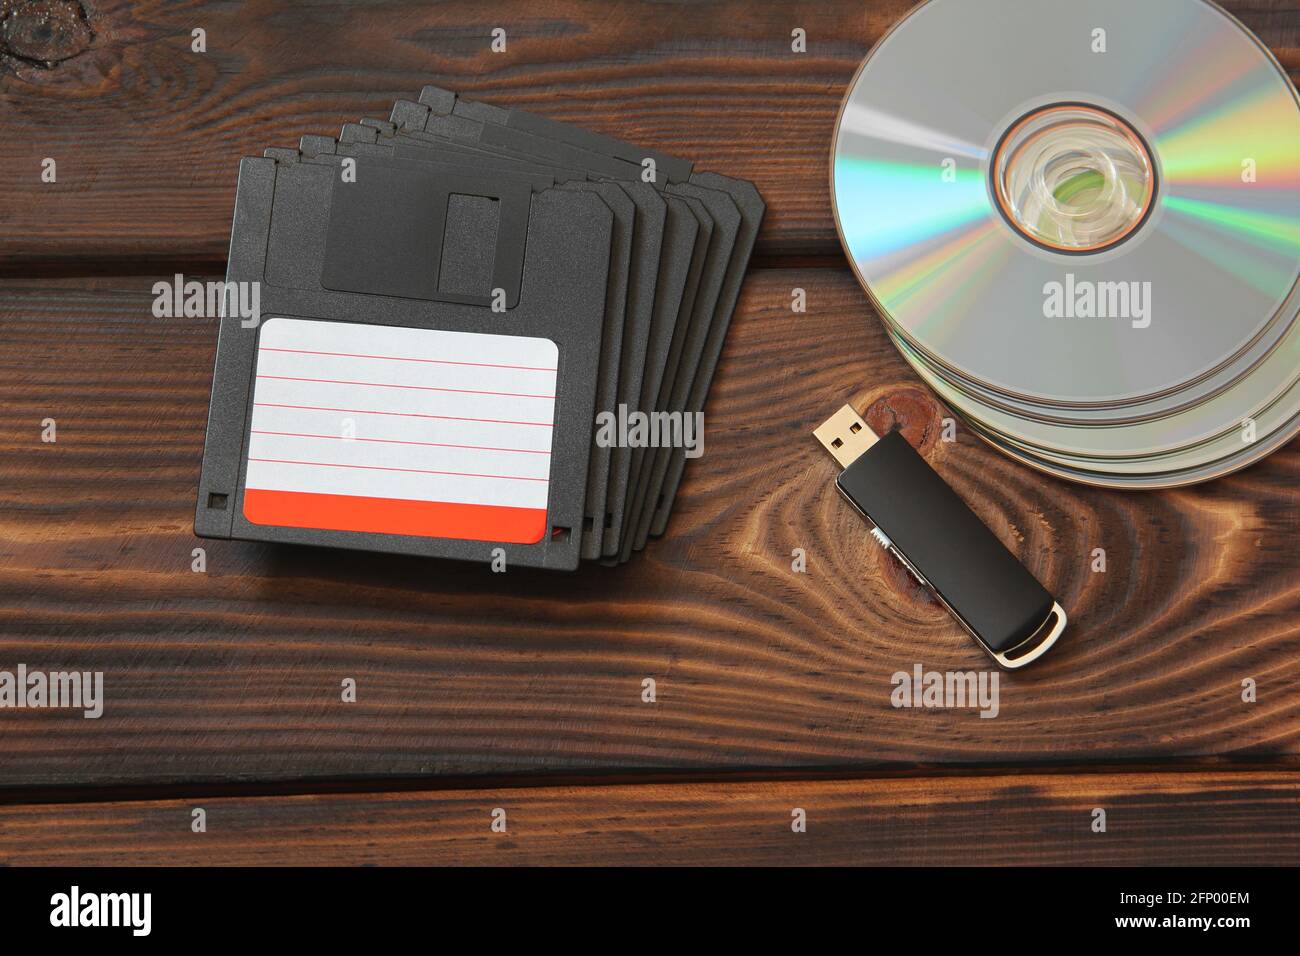 Floppy disks, USB flash drive and disks on a wooden background Stock Photo